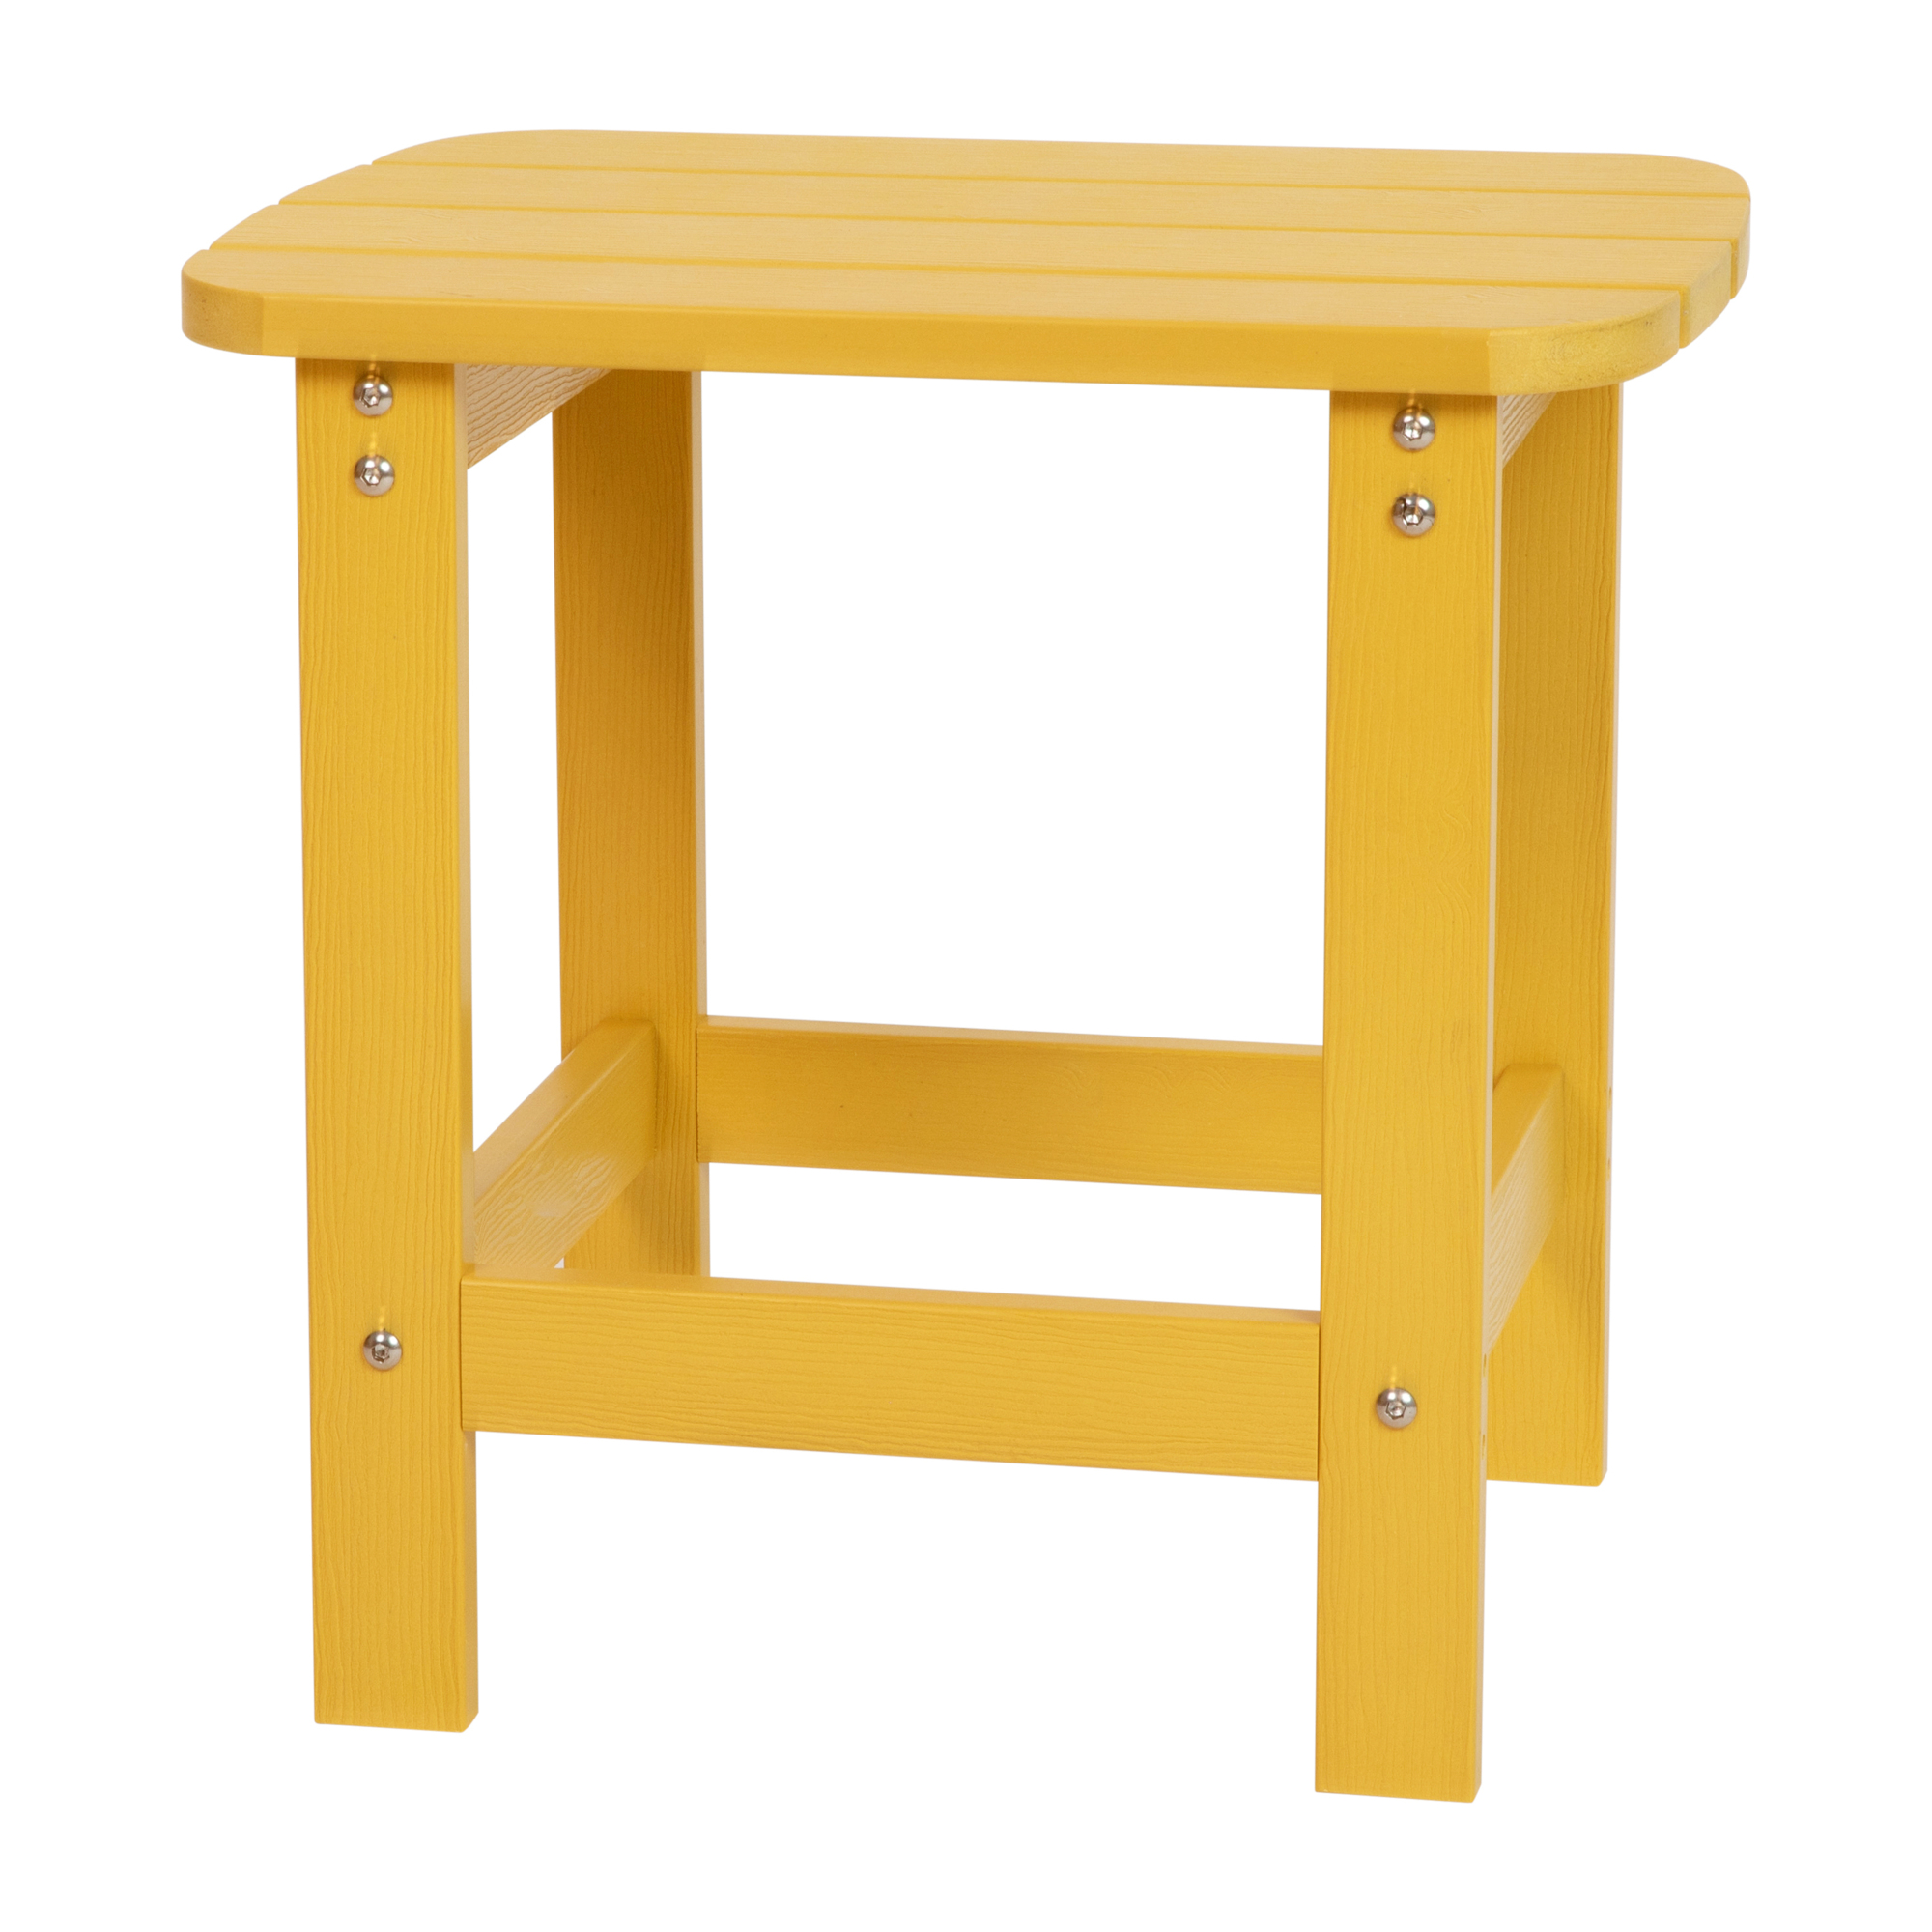 Flash Furniture, Yellow All-Weather Adirondack Side Table, Table Shape Rectangle, Primary Color Yellow, Height 18.25 in, Model JJT14001YLW